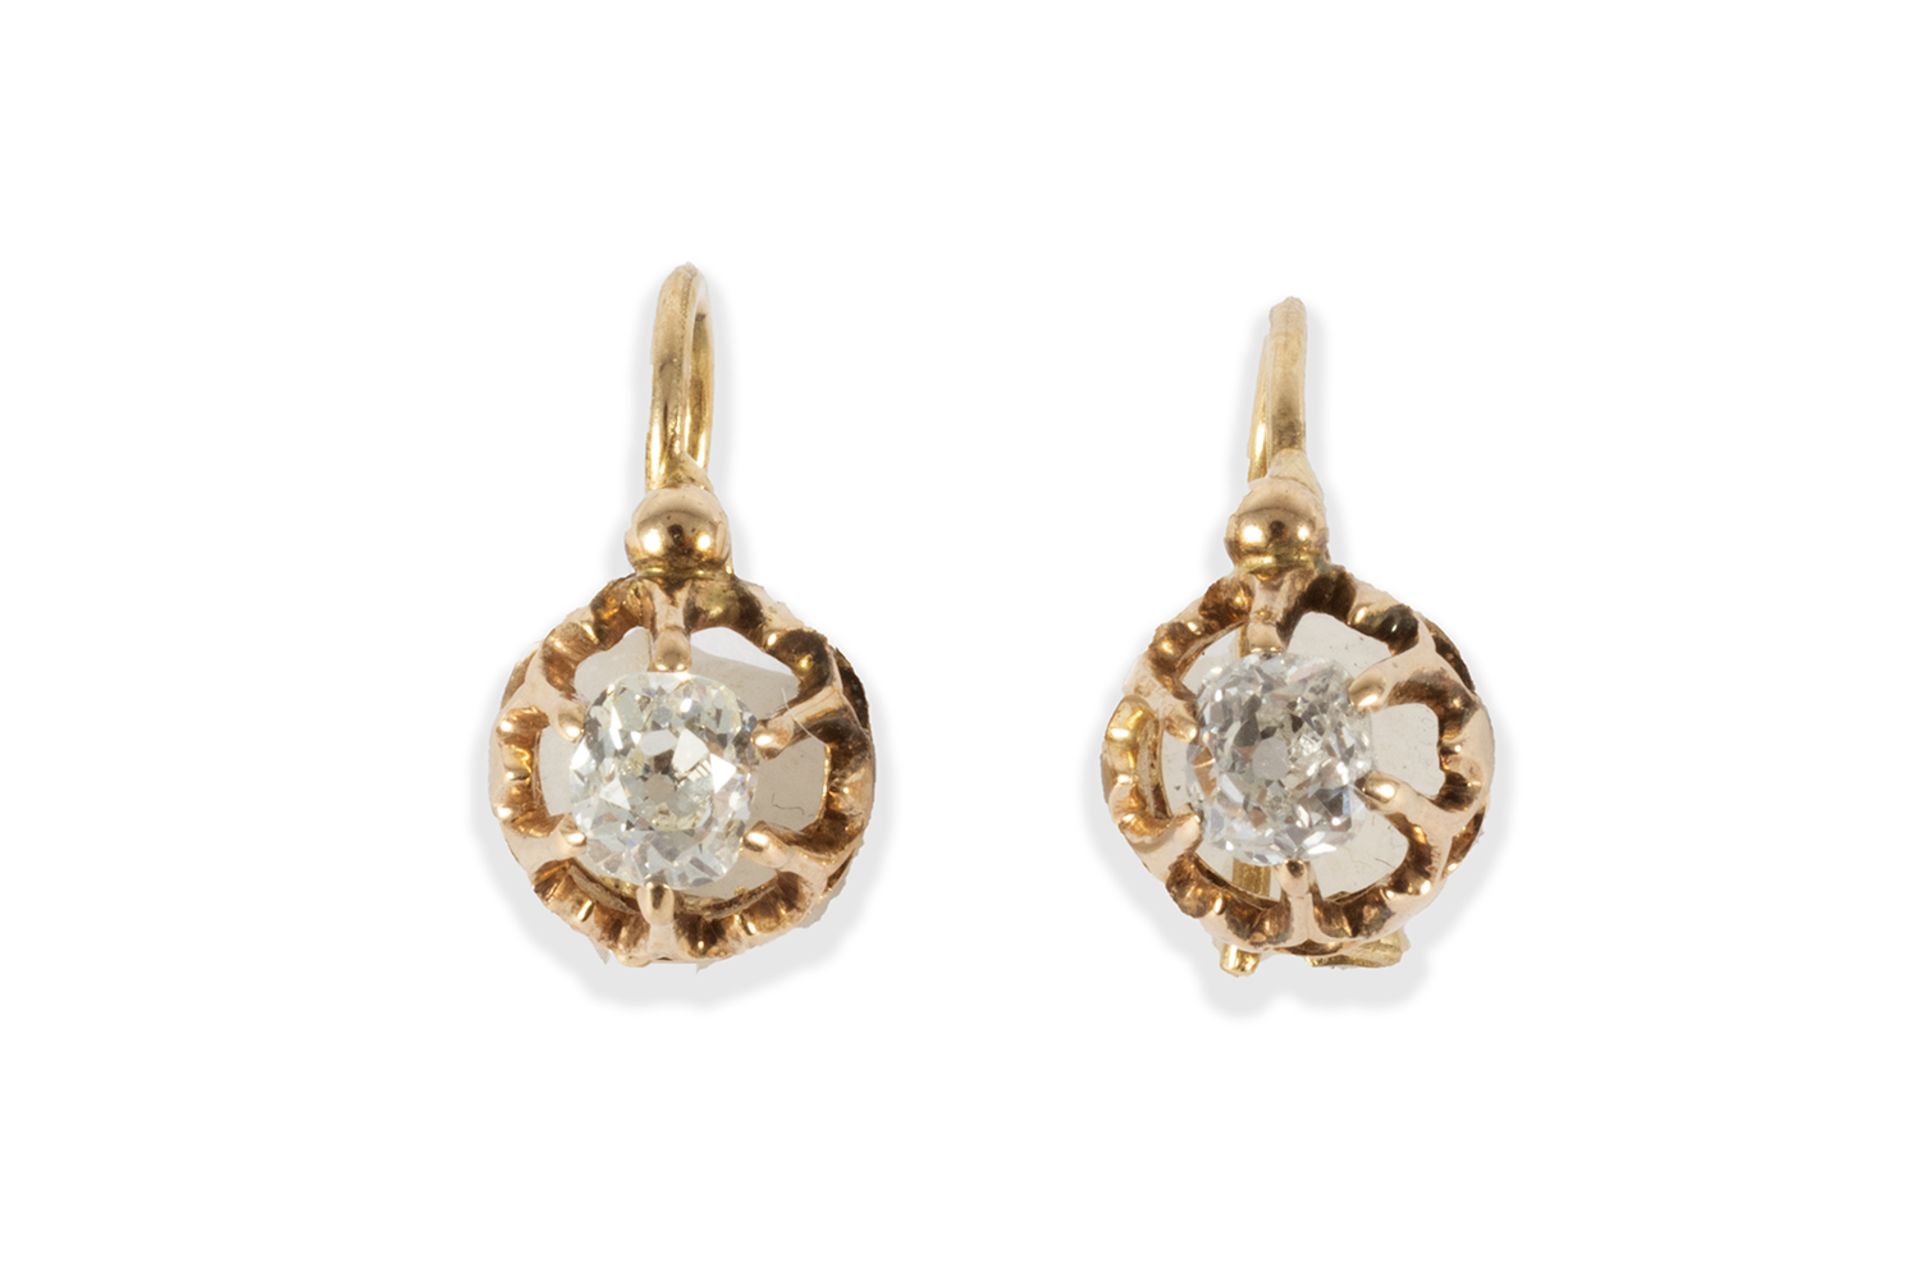 Antique brilliant cut diamond and gold earrings.